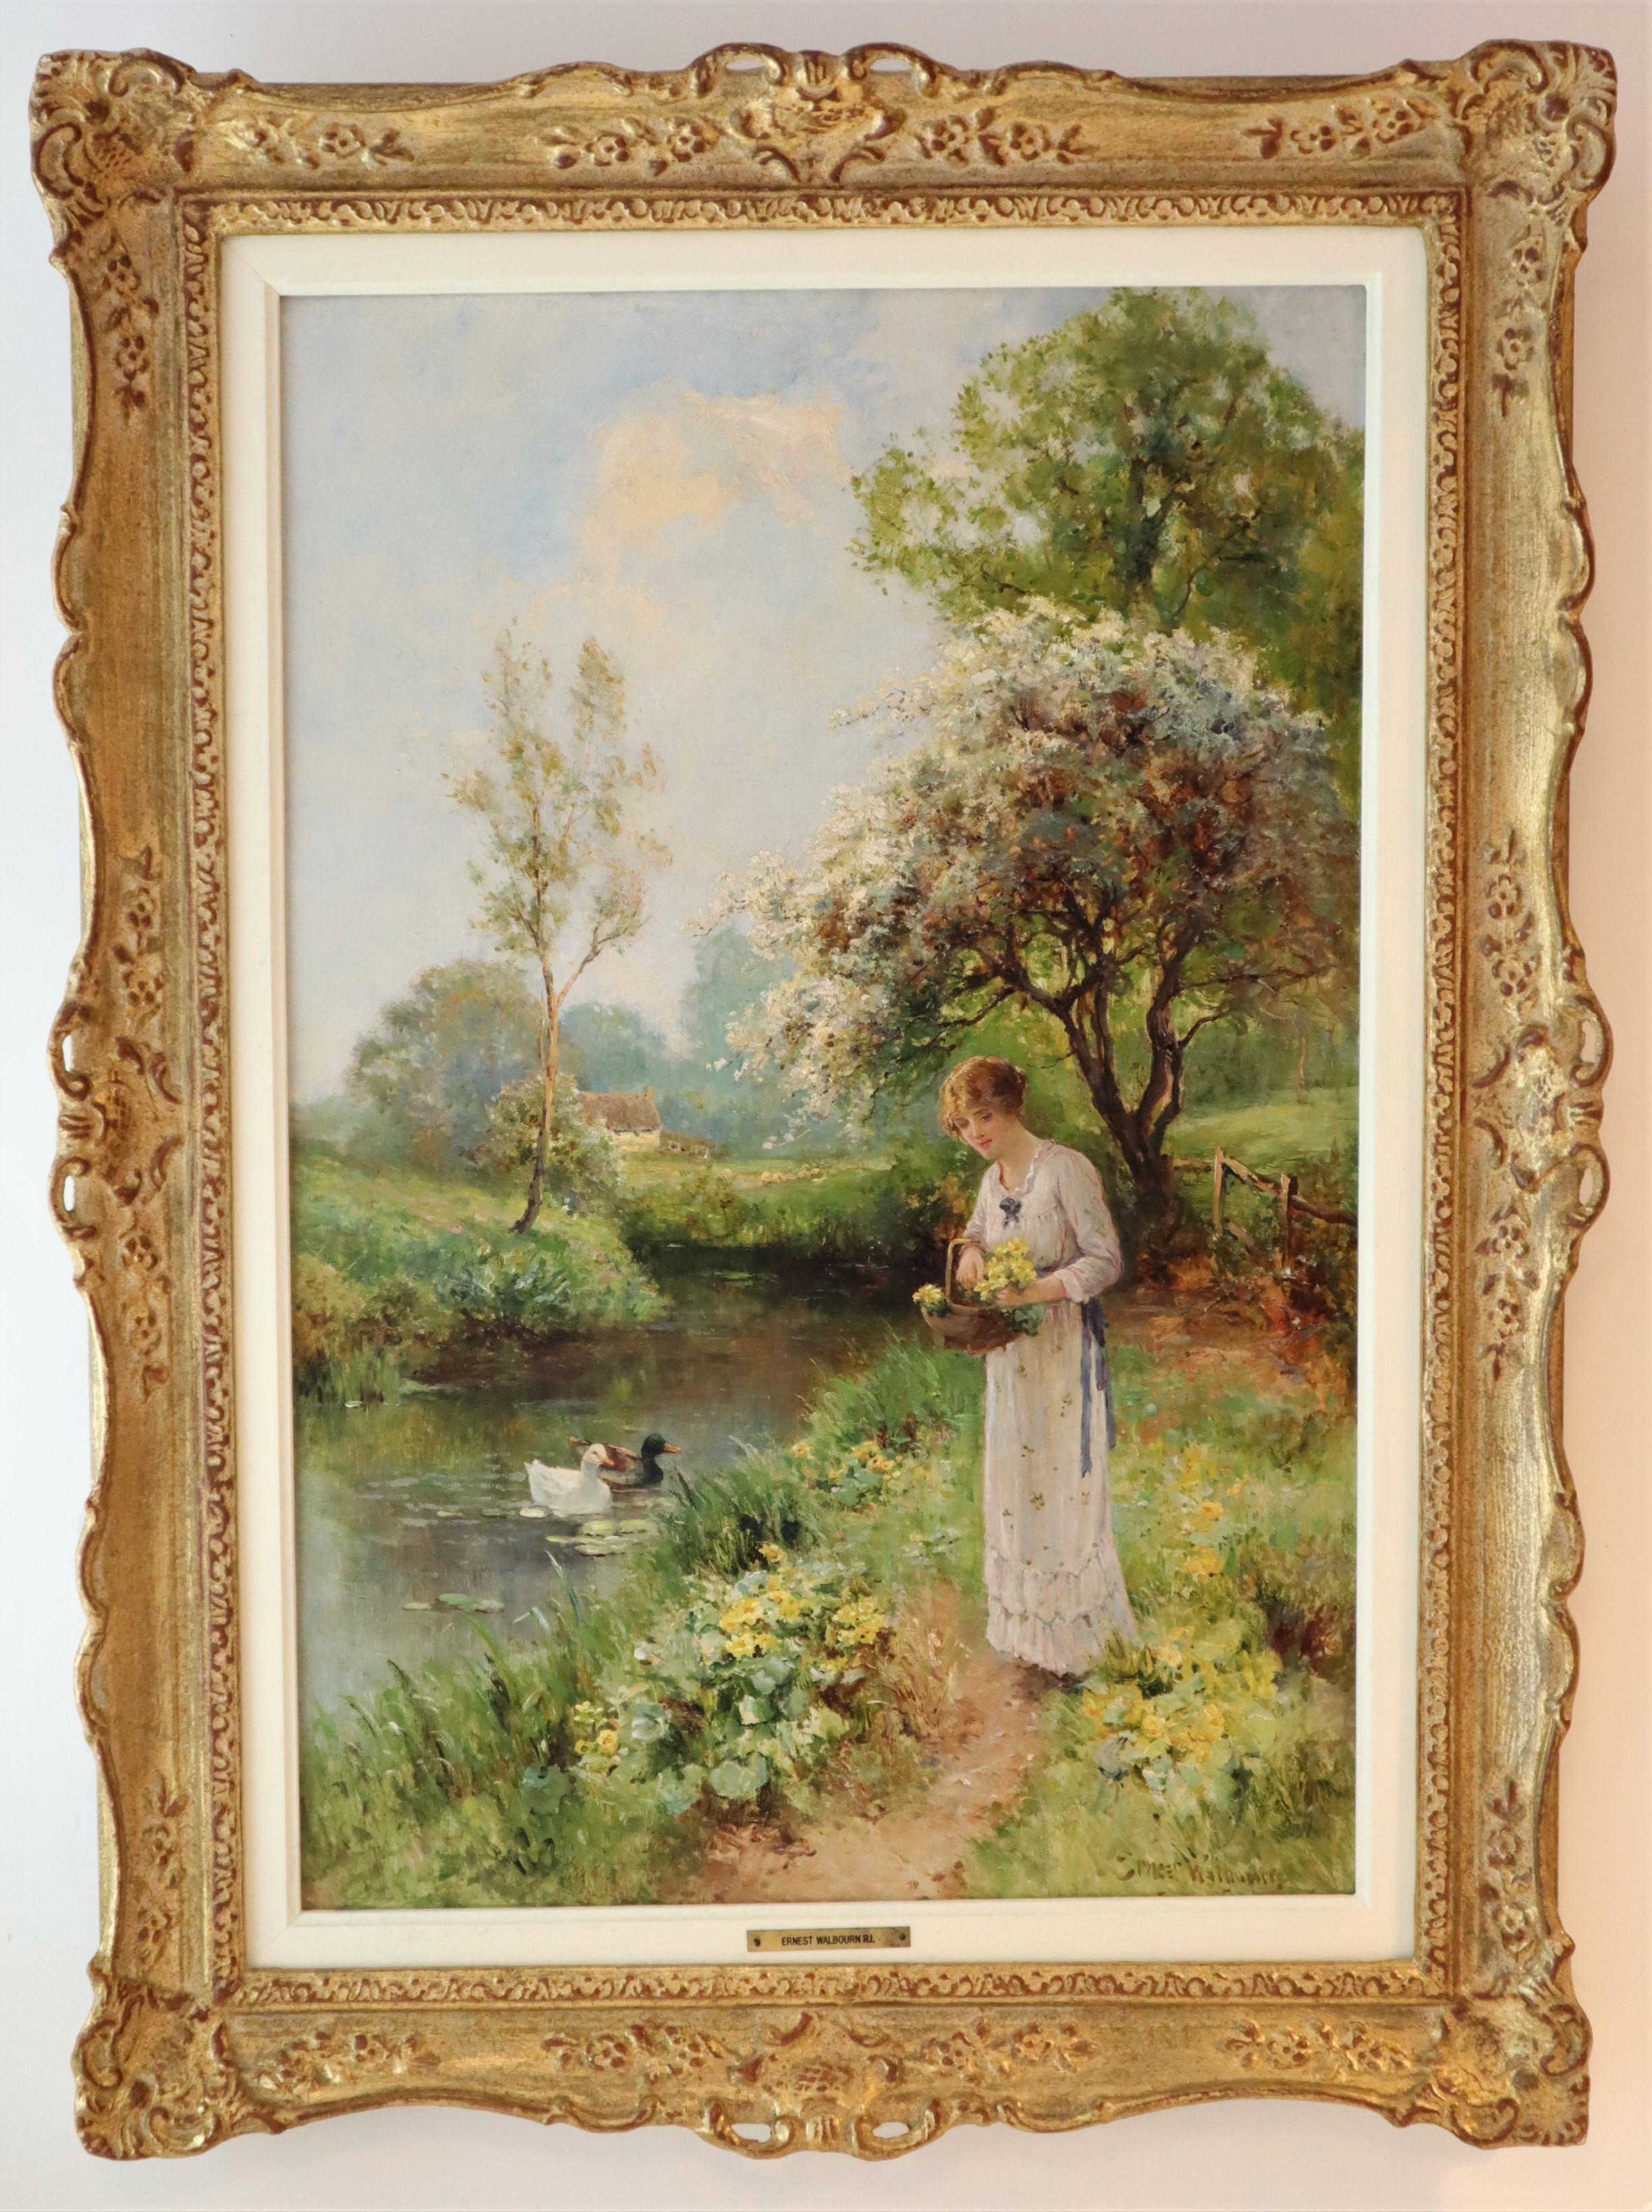 Ernest Charles Walbourn Dalston, 1872, Middlesex, 1927?
Walbourn dedicated his career to creating Victorian landscapes and countryside scenes.
Our painting reflects one of these charming scenes from the artist’s production. The free use of brush